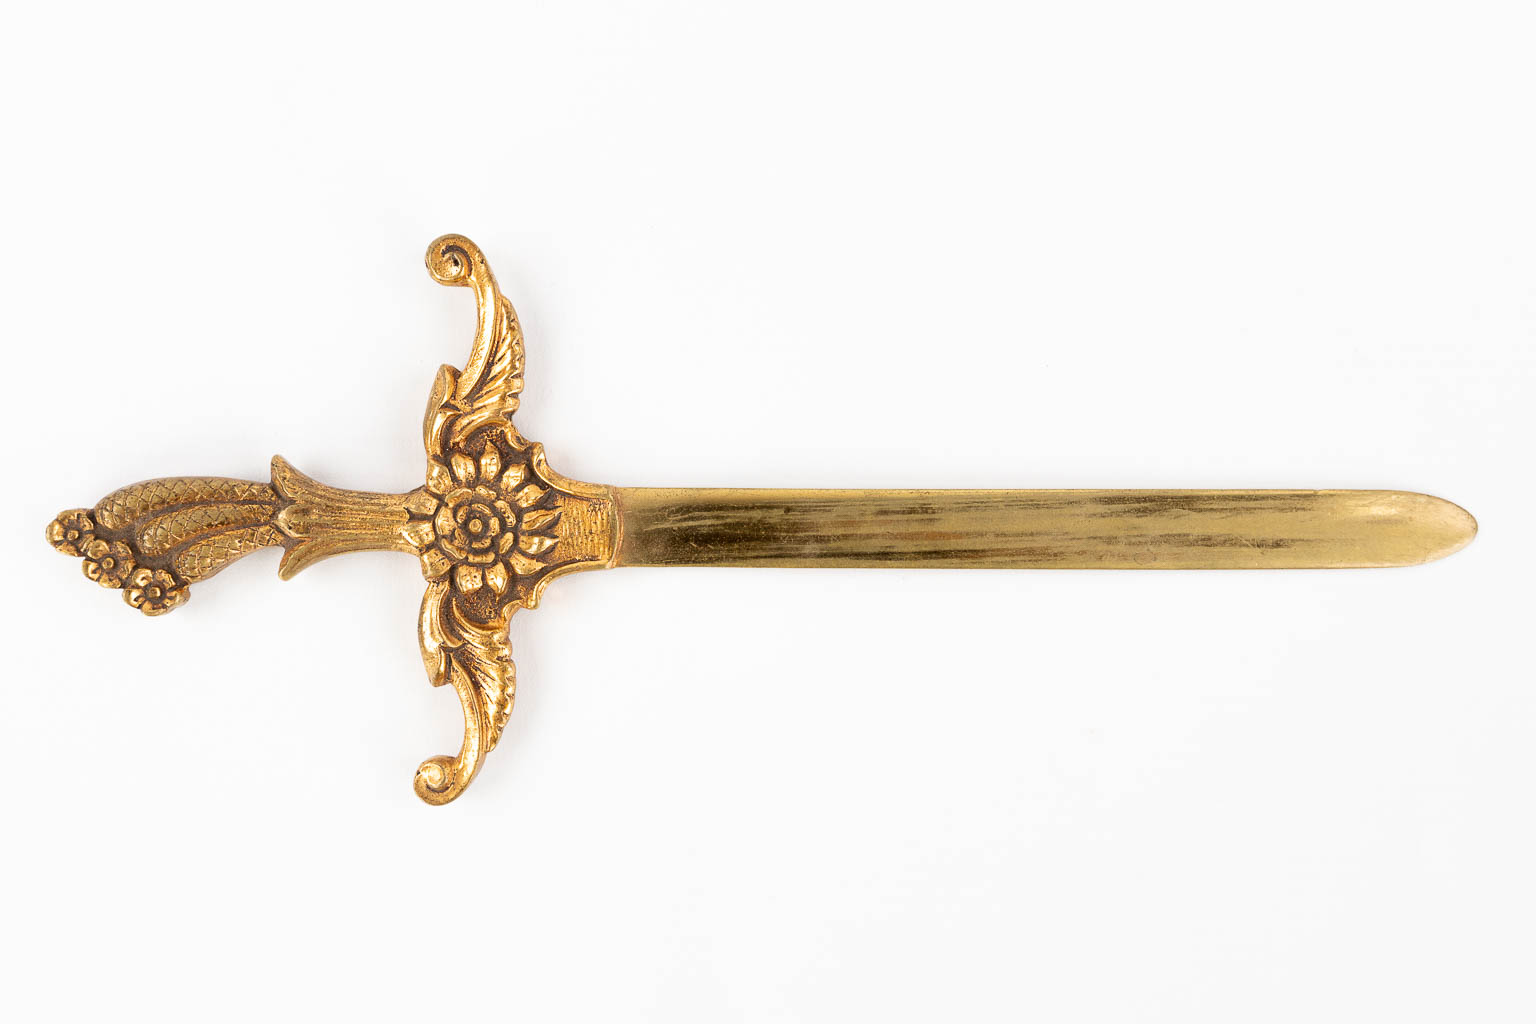 A large inkwell holder and letter opener, brass in rococo style. 20th C. (L: 28 x W: 42 x H: 13,5 cm)